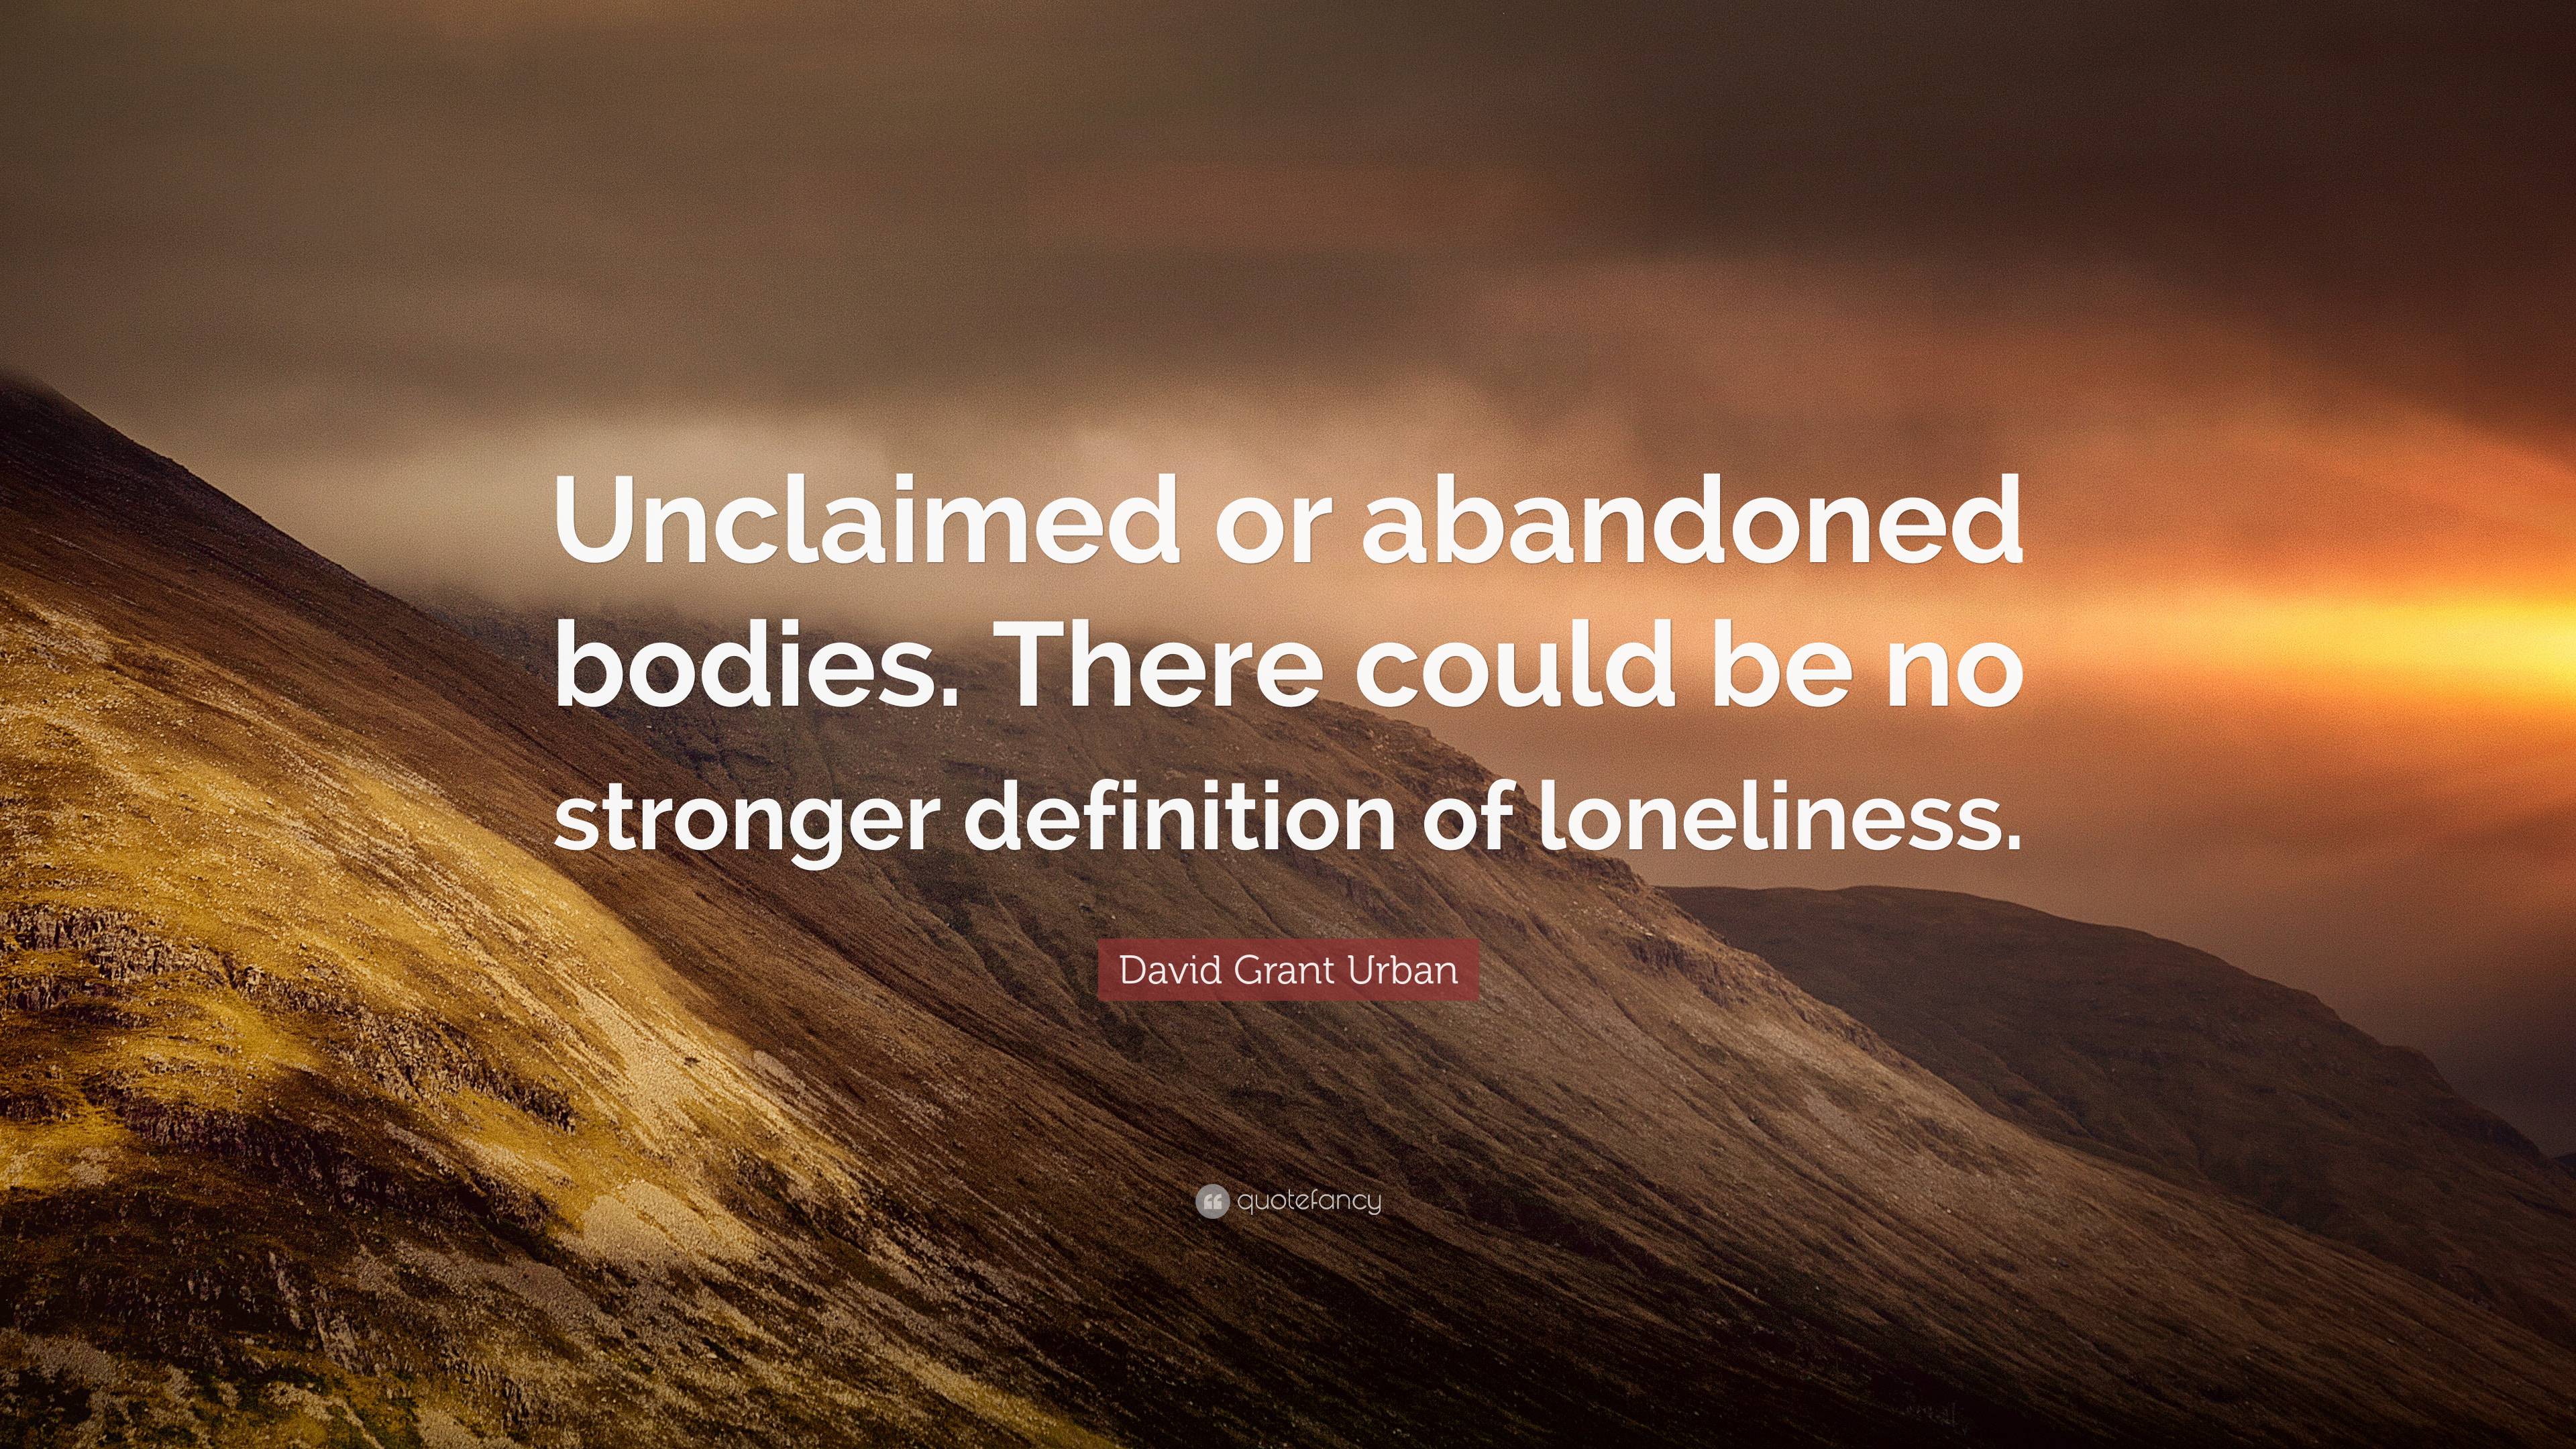 Unbearable bodies: When nobody is good enough - Sociological Images